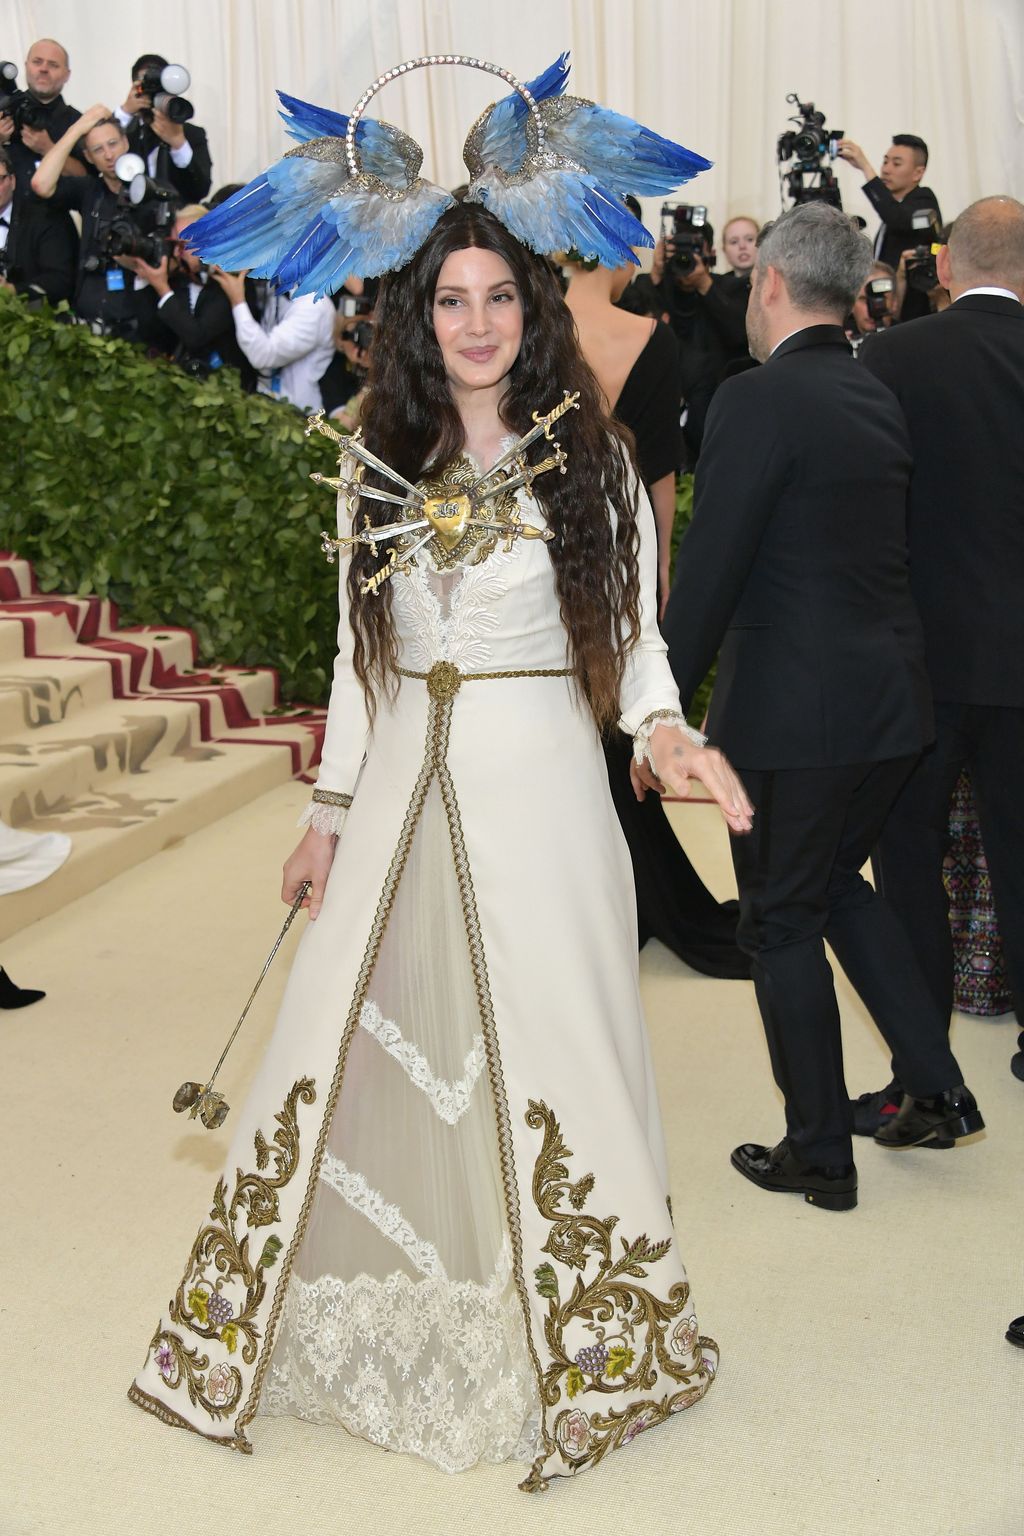 NEW YORK, NY - MAY 07:  Lana Del Rey attends the Heavenly Bodies: Fashion & The Catholic Imagination Costume Institute Gala at The Metropolitan Museum of Art on May 7, 2018 in New York City.  (Photo by Neilson Barnard/Getty Images)